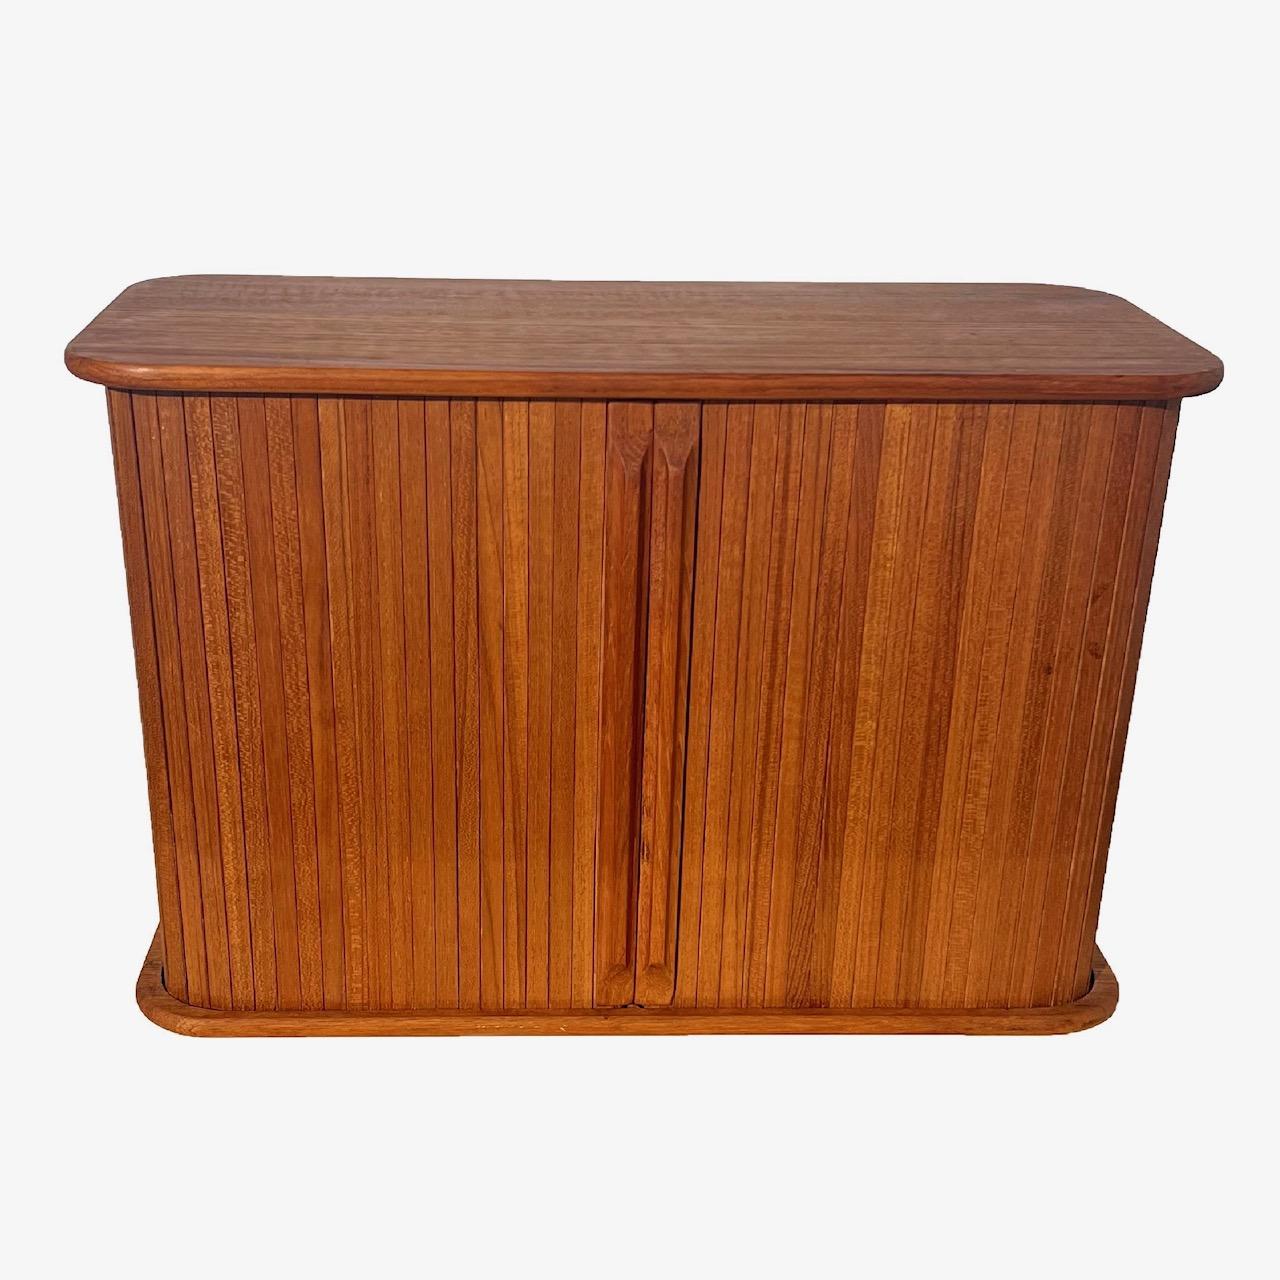 For your consideration we offer this fantastic teak, well crafted, floating, vintage storage cabinet featuring tamboured doors. A clever, useful design incorporates flush mounting teardrop brackets for easy installation that fits snugly against a